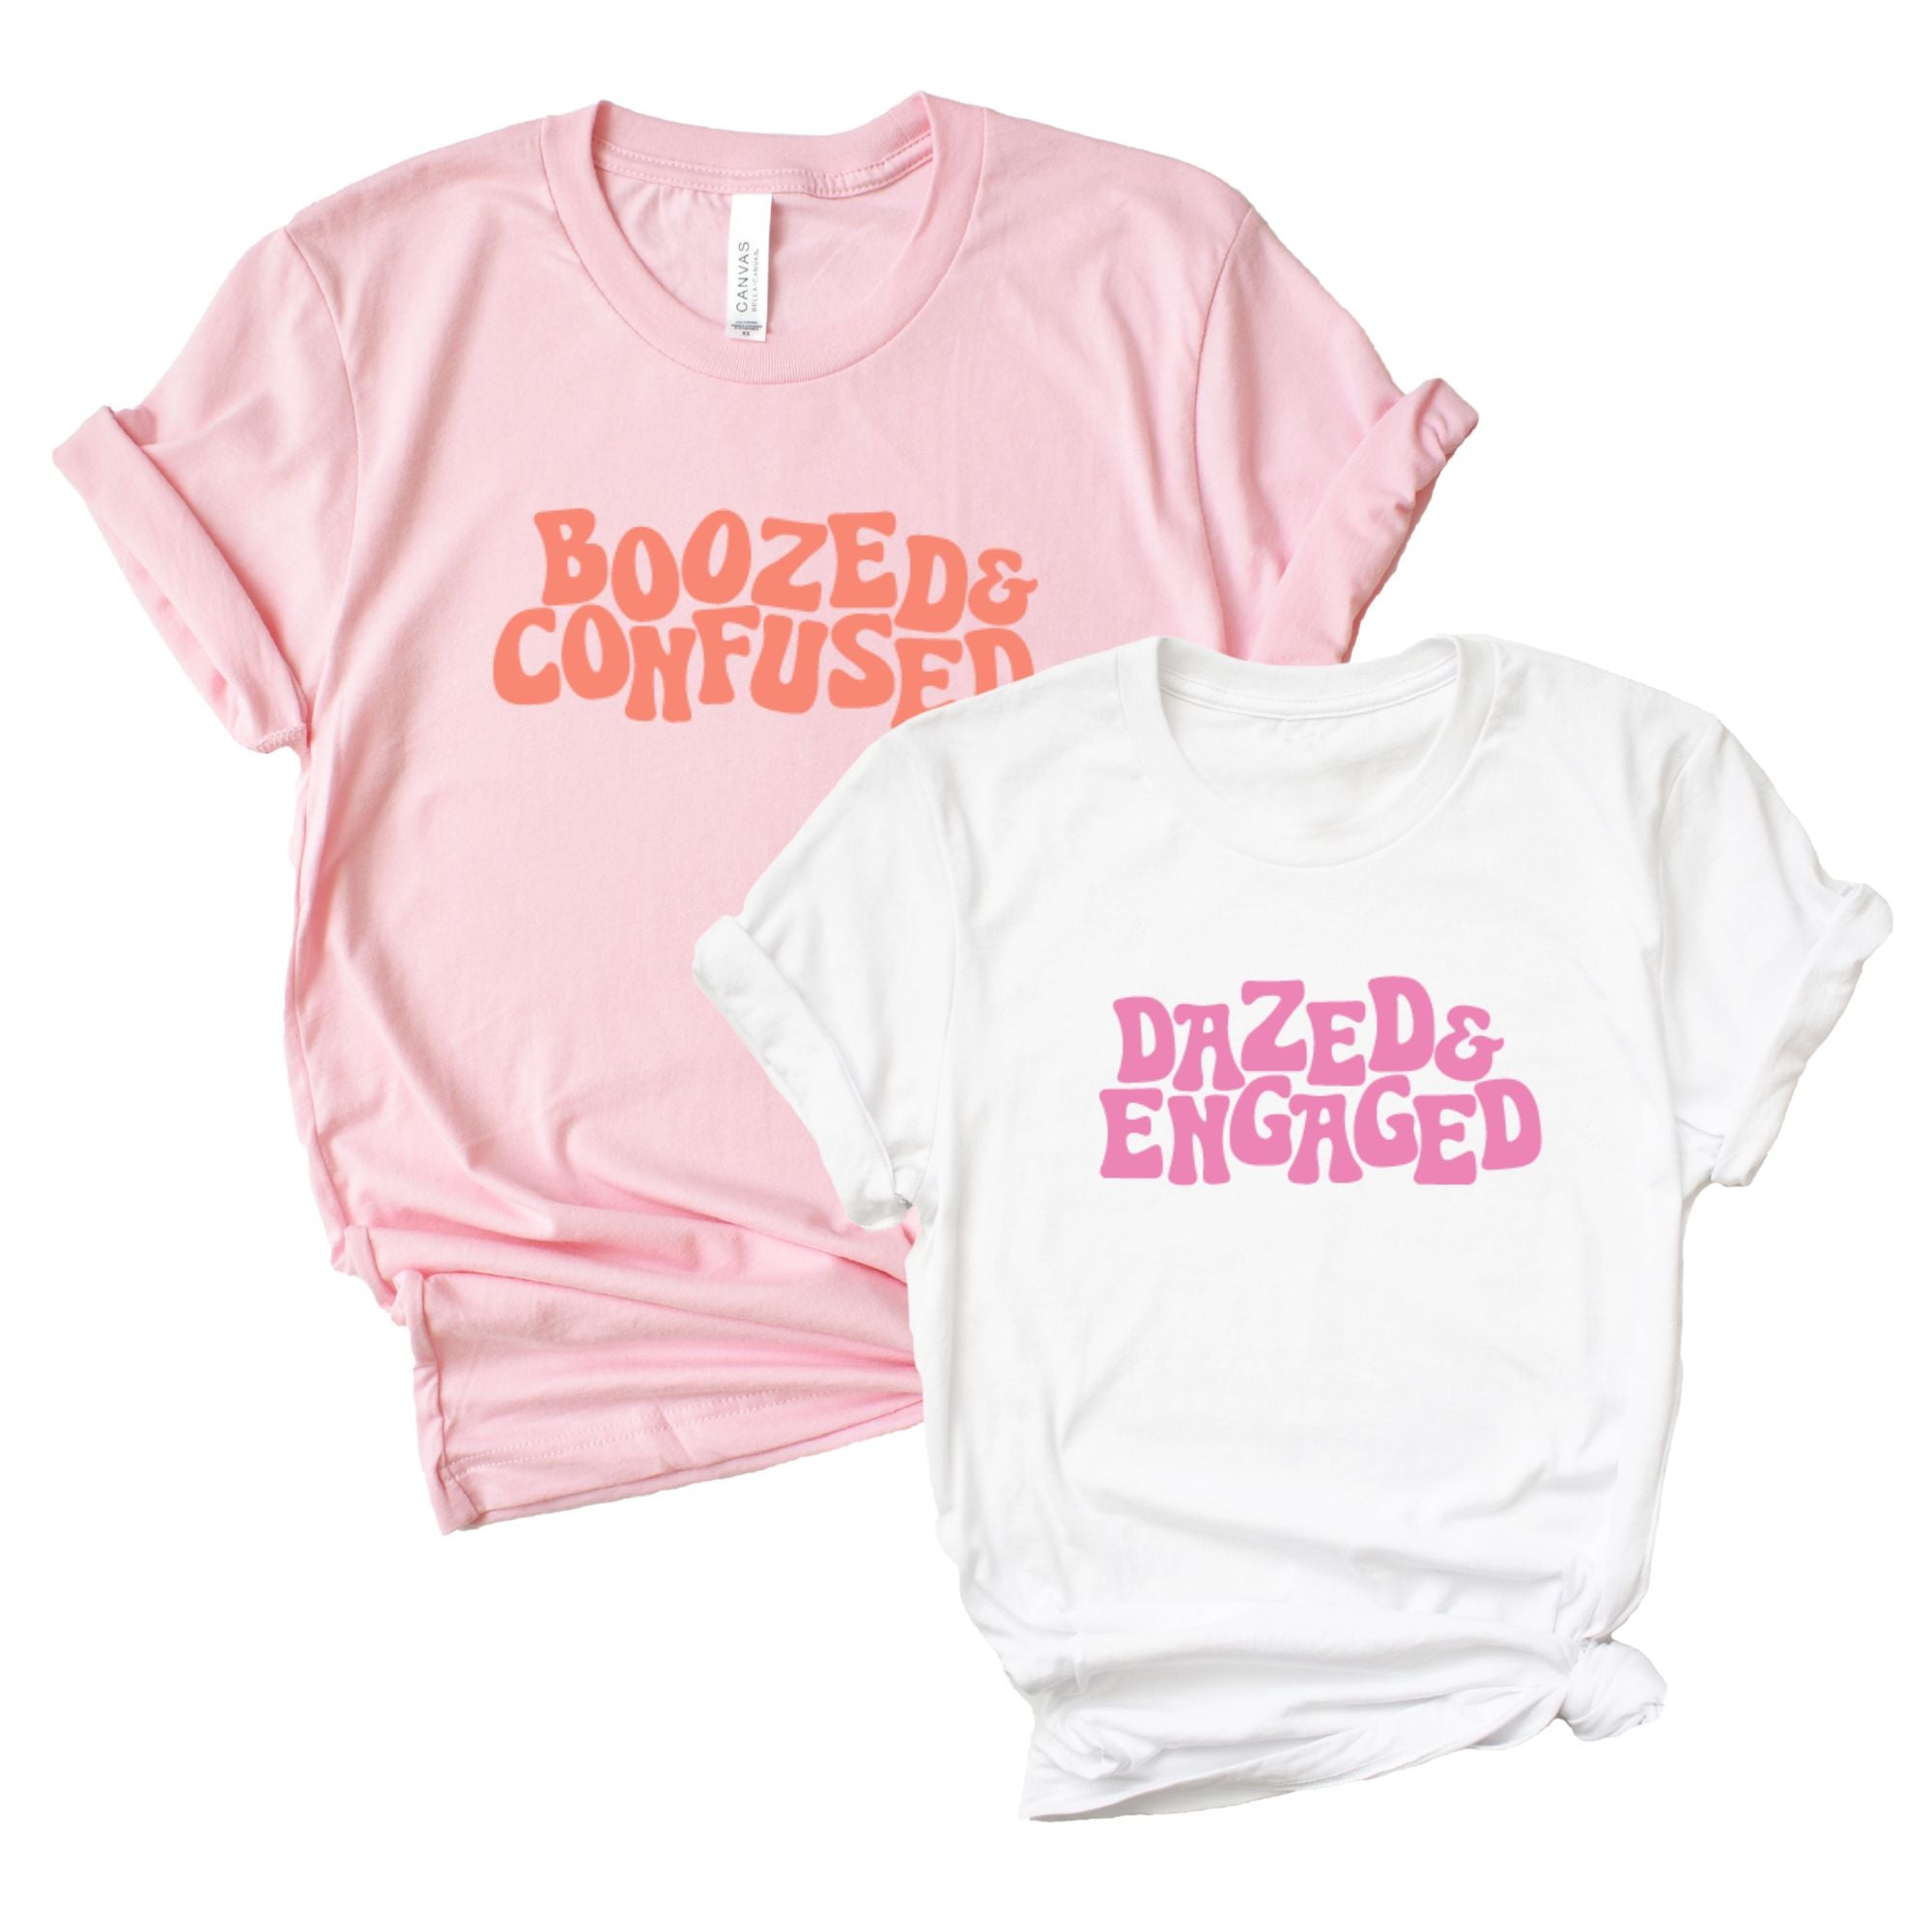 Dazed and Engaged / Boozed and Confused Shirt - Sprinkled With Pink #bachelorette #custom #gifts